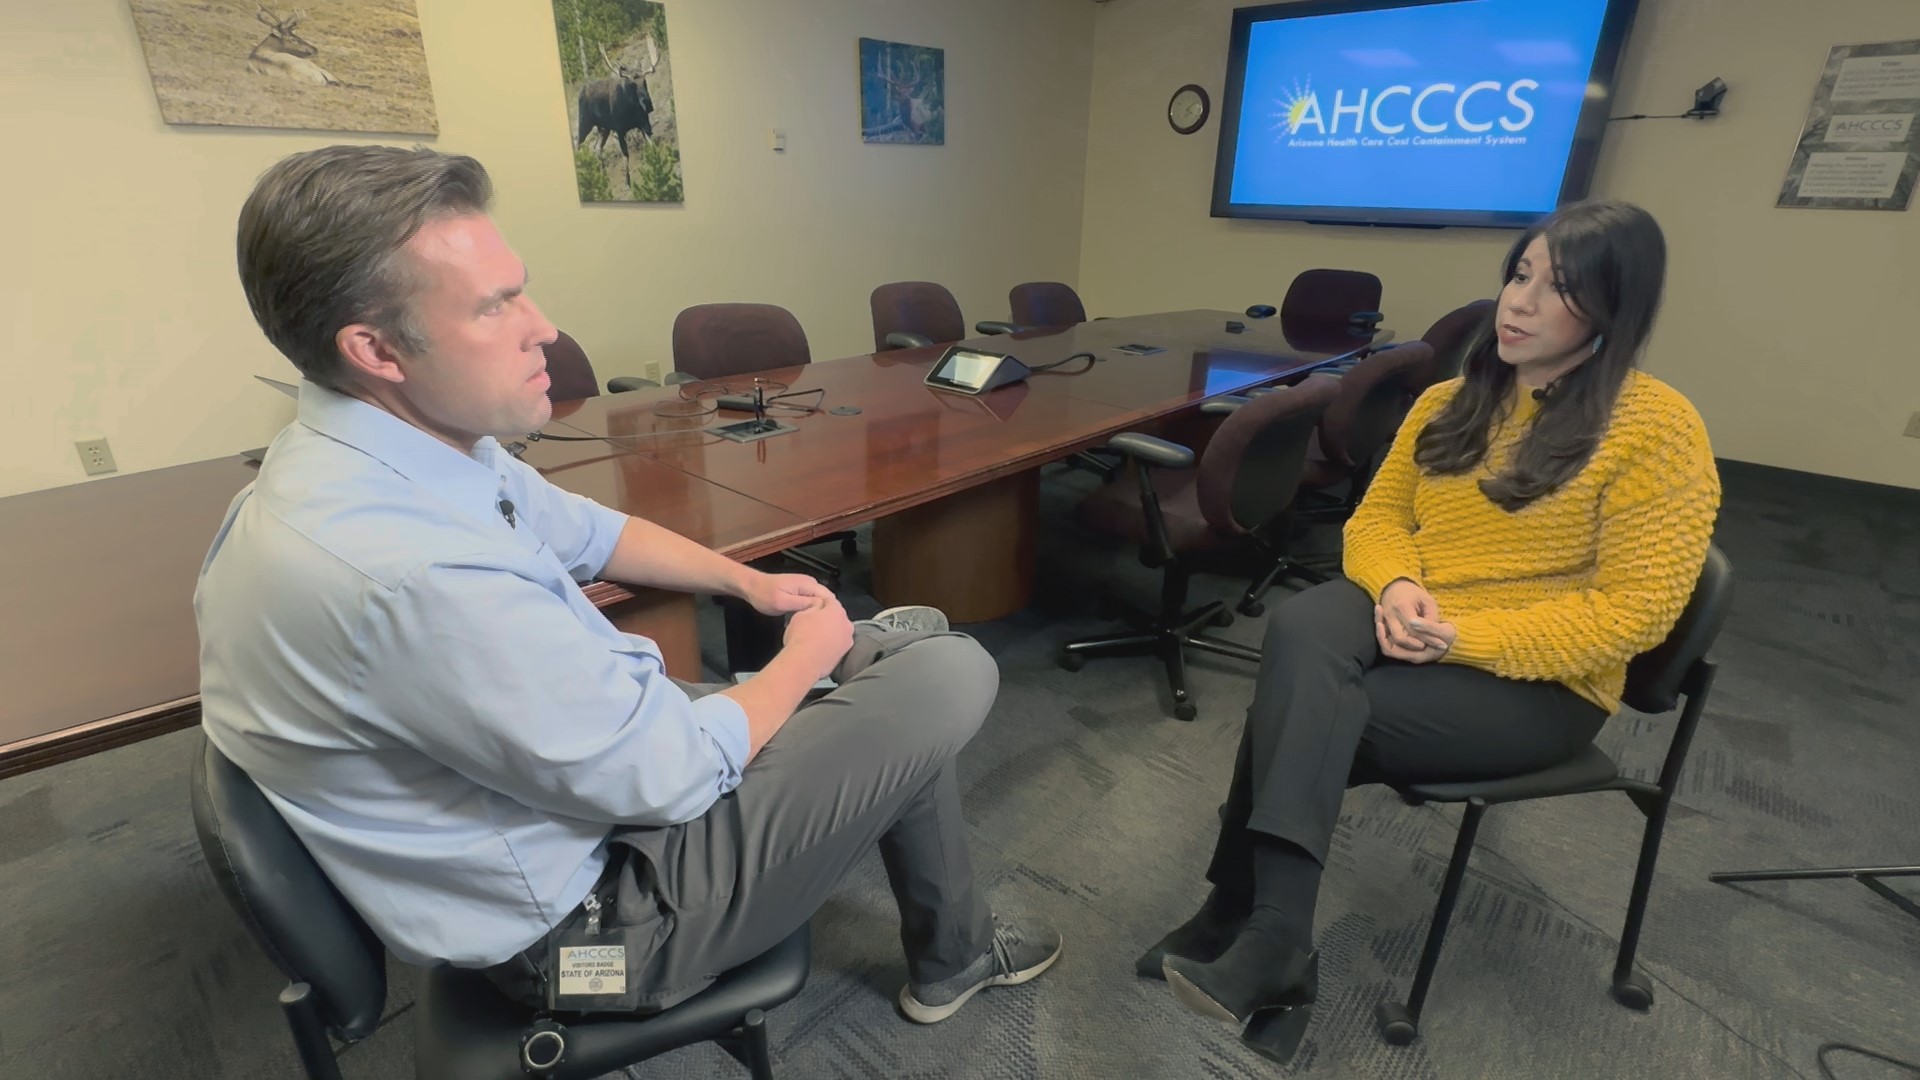 In an interview with 12News, the CEO of AHCCCS says bills are coming to address the loopholes that allowed hundreds of millions of dollars in fraud.